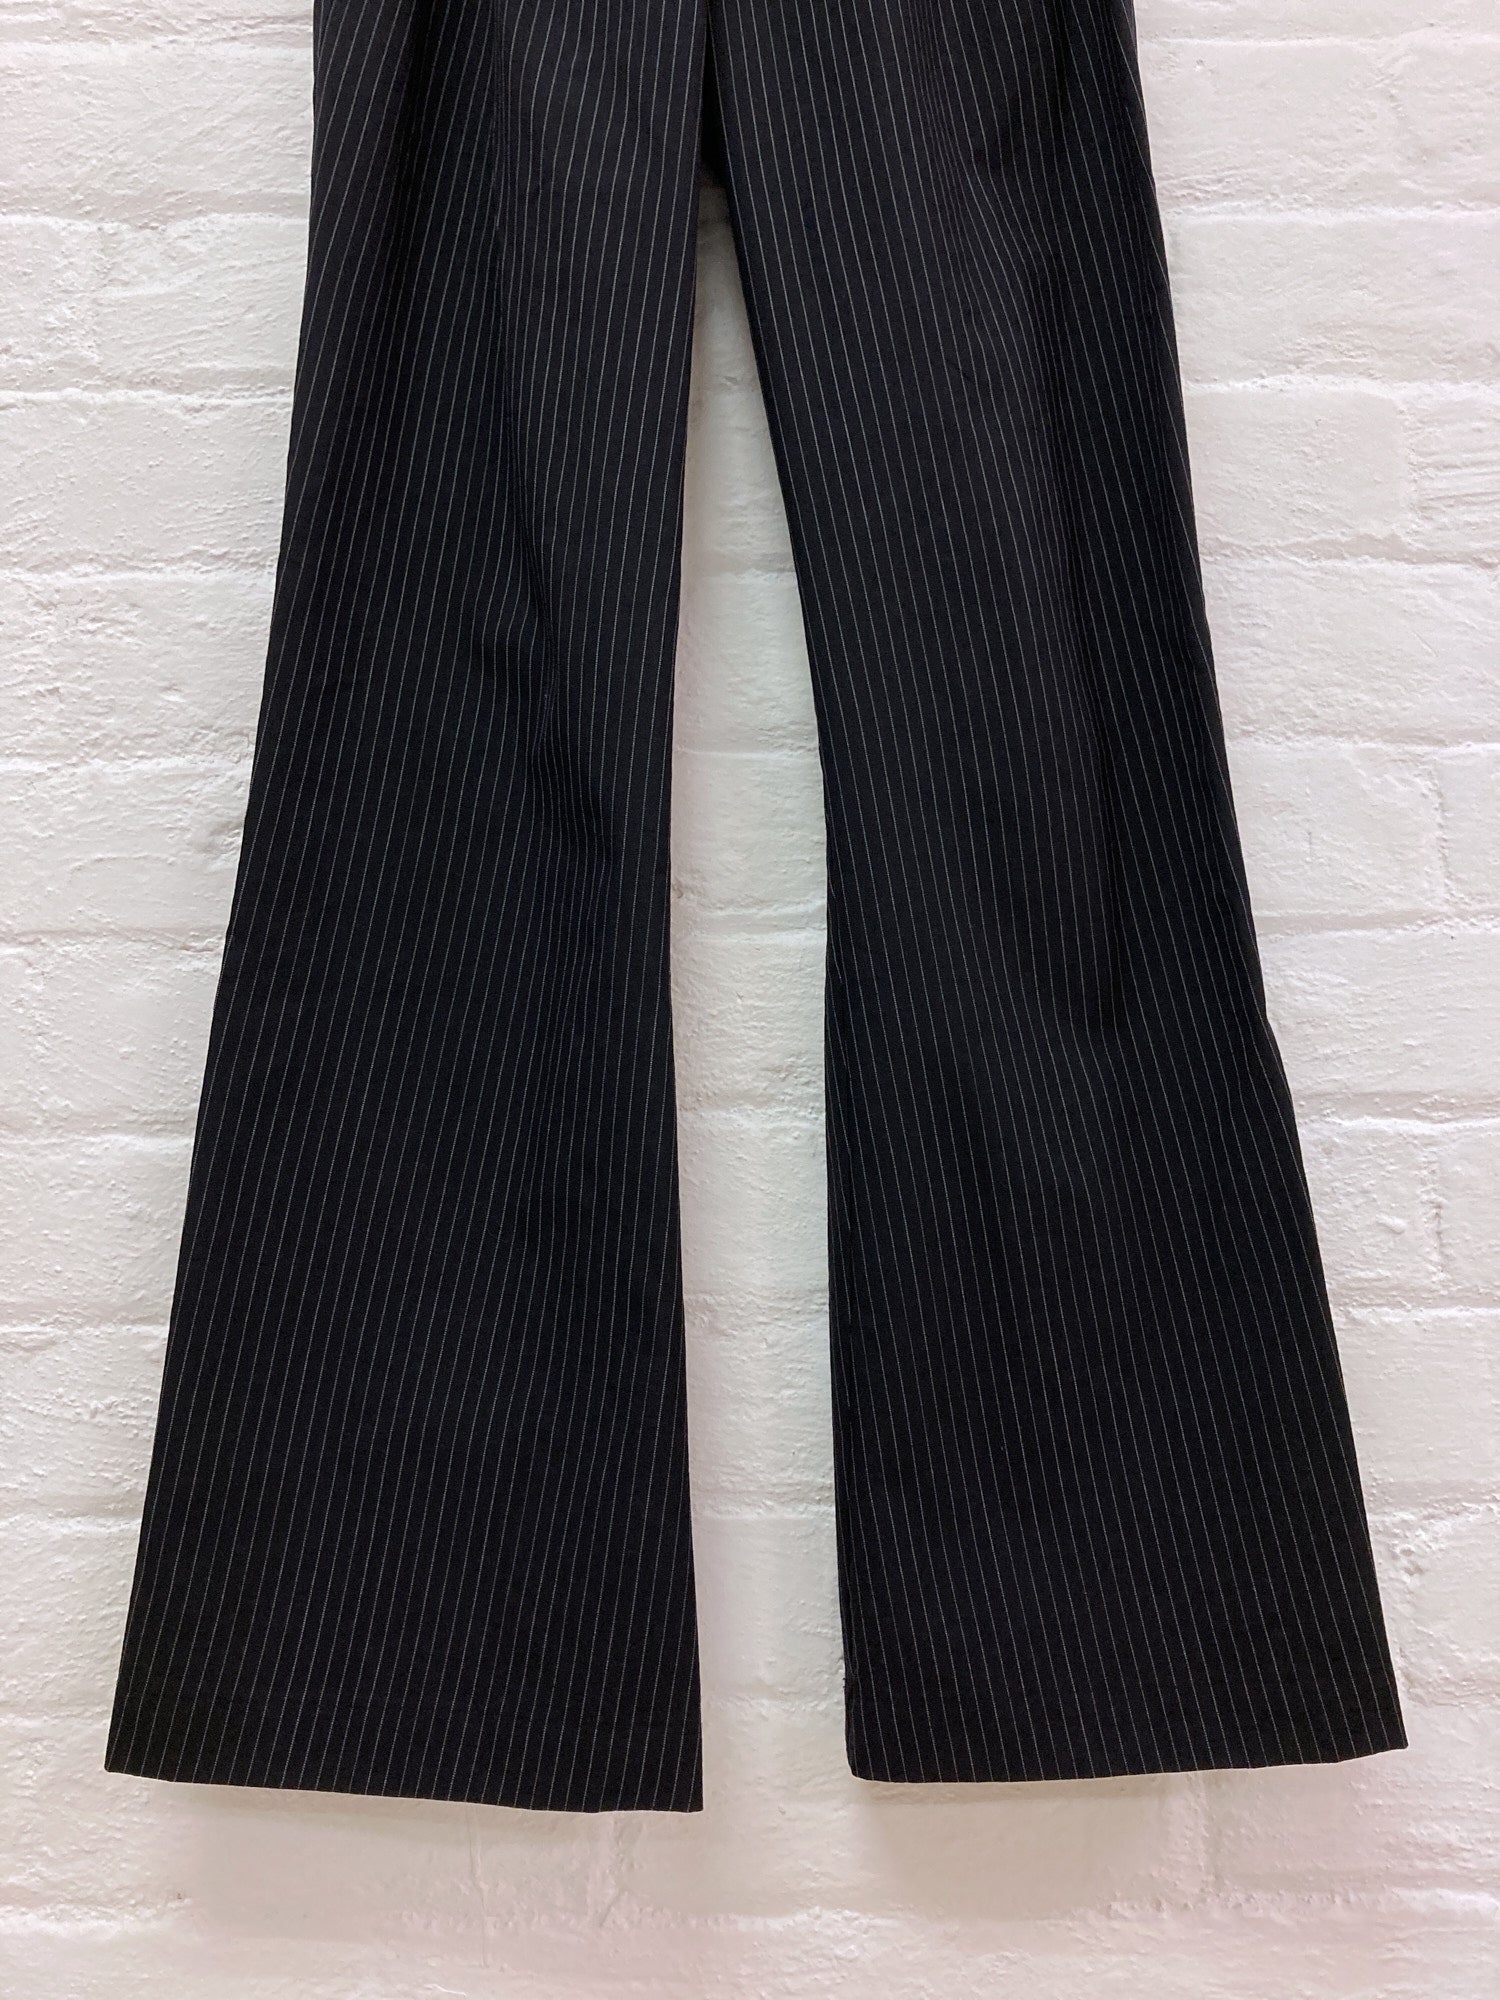 Junya Watanabe Comme des Garcons 1996 striped wool elastic waist flared trousers